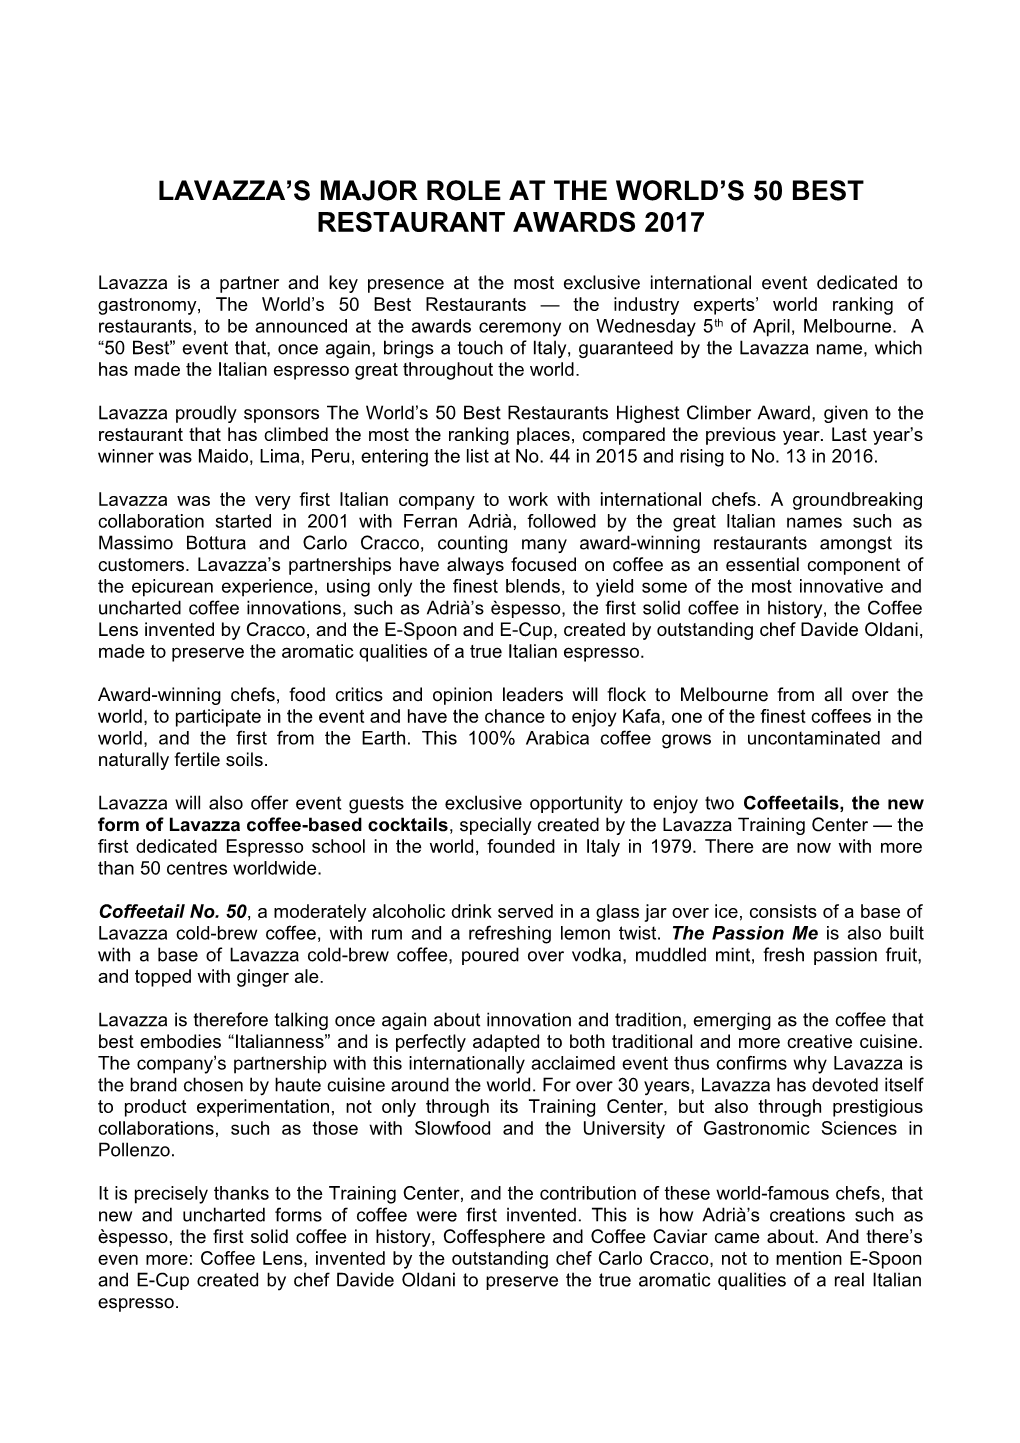 Lavazza S Major Role at the World S 50 Best Restaurant Awards 2017